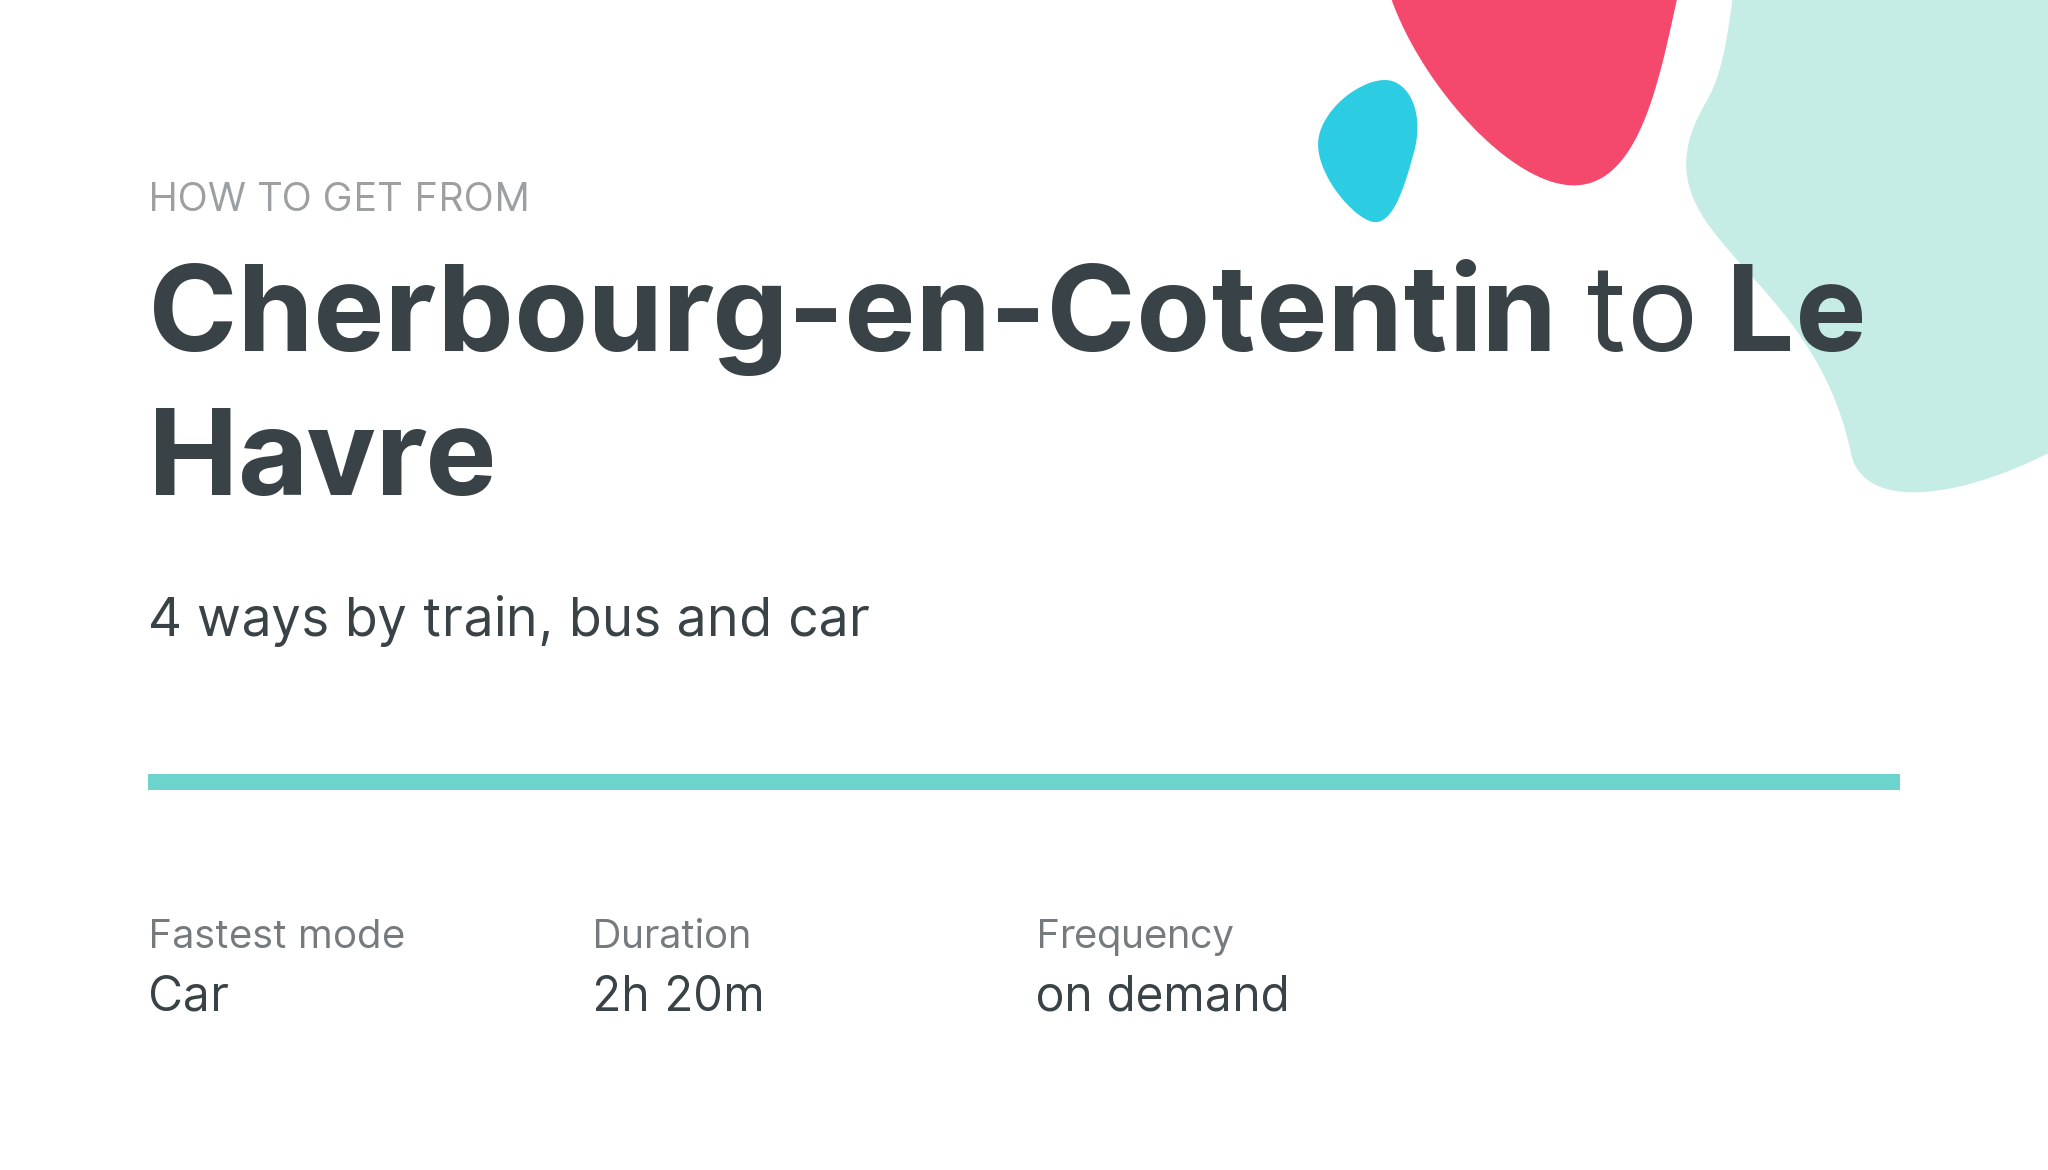 How do I get from Cherbourg-en-Cotentin to Le Havre